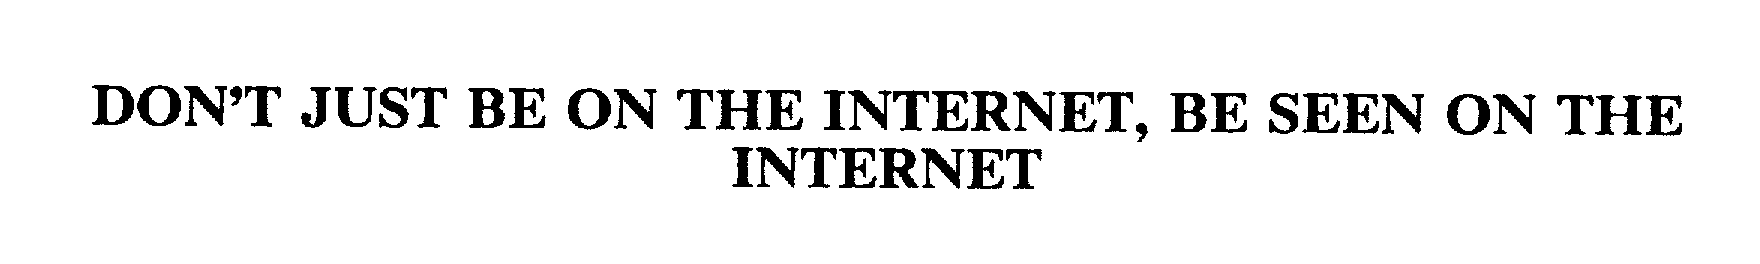  DON'T JUST BE ON THE INTERNET, BE SEEN ON THE INTERNET